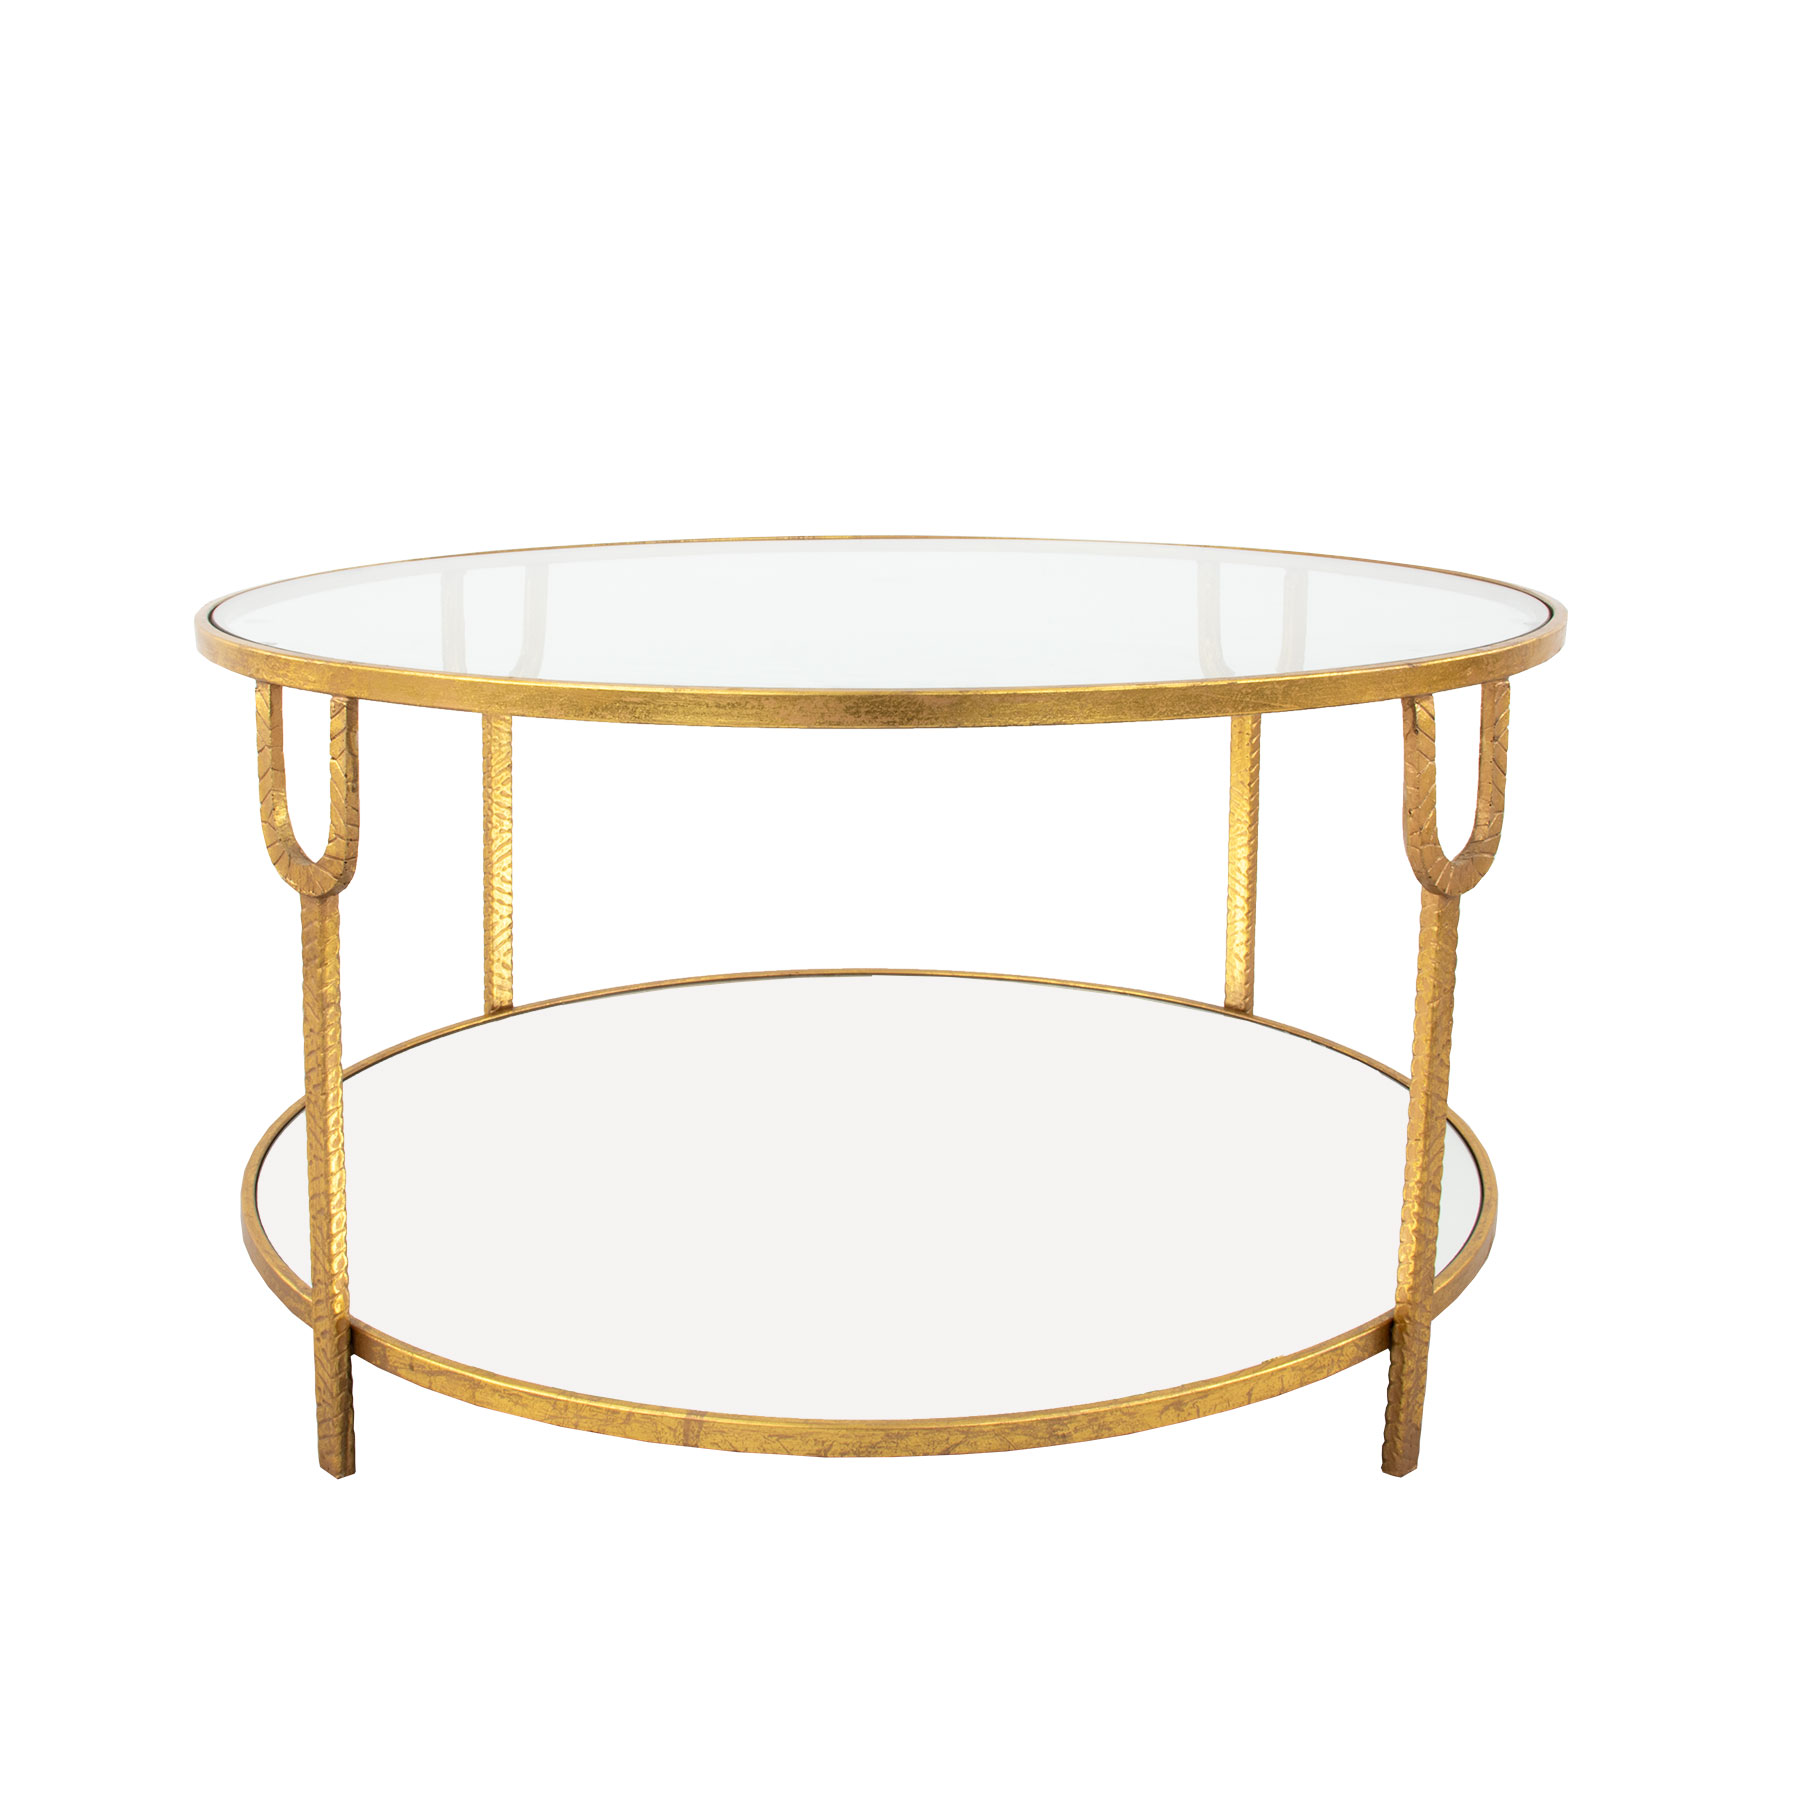 Khloe Gold Leaf Round Coffee Table- Lillian Home